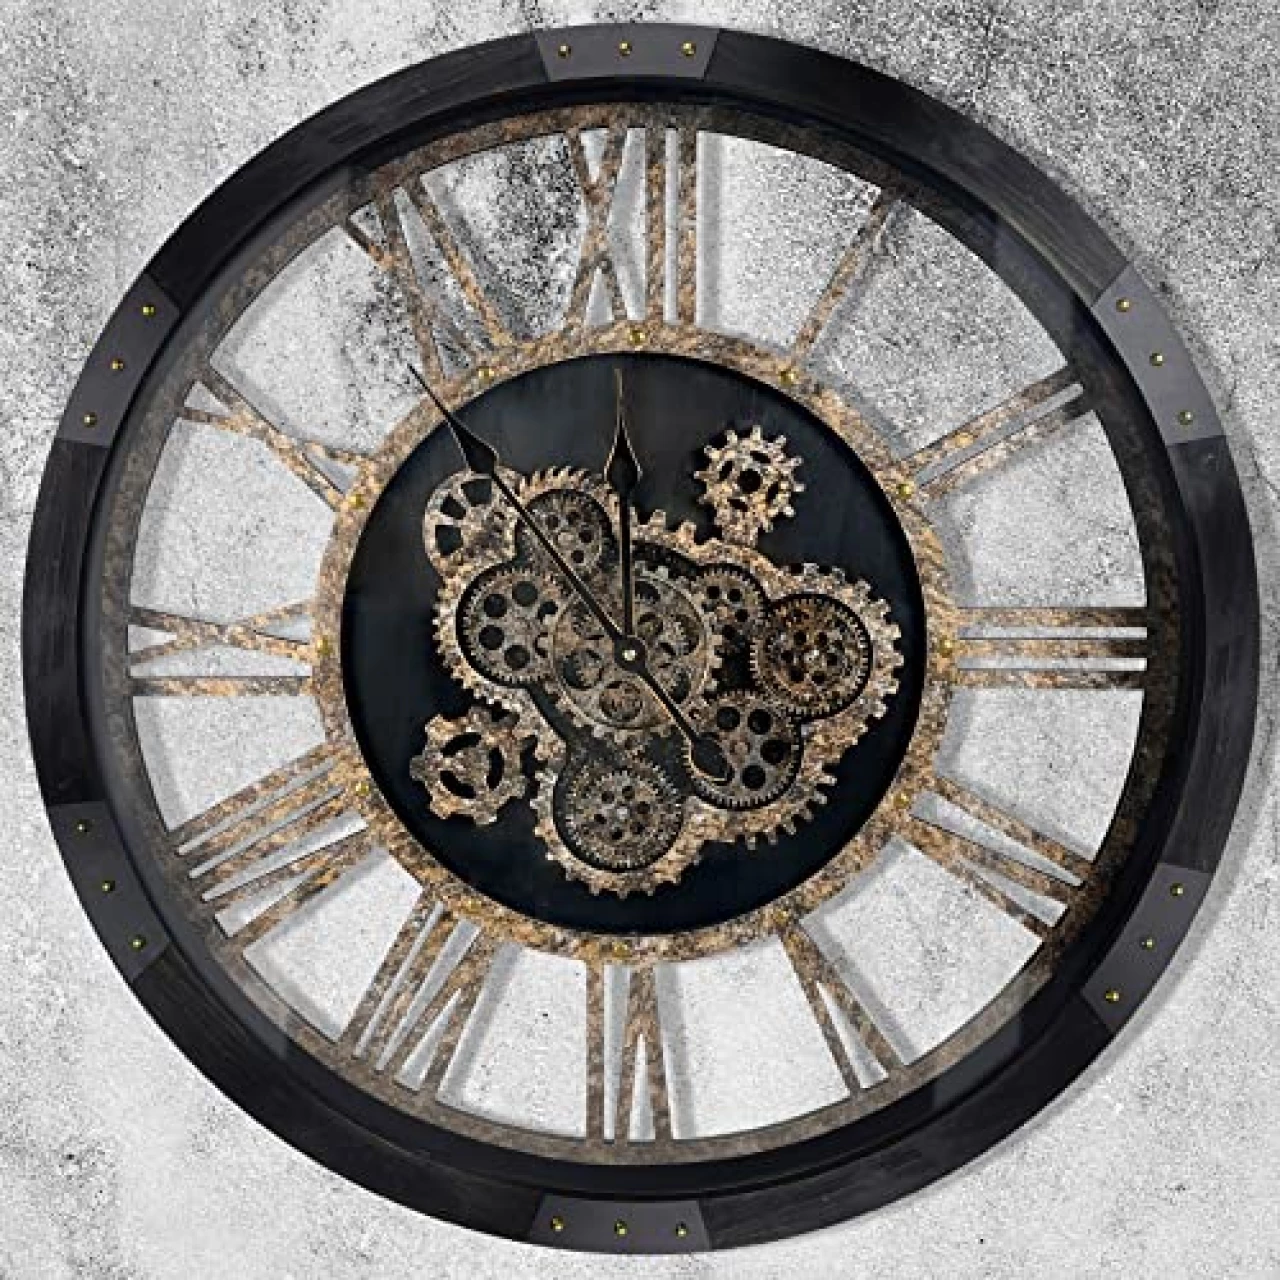 27 inch Large Real Moving Gears Wall Clock with Toughened Glass Cover, Oversized Solid Wood Retro Farmhouse Clock, Giant Decorative Rustic Wall Clock for Living Room Home Kitchen Office (Black)